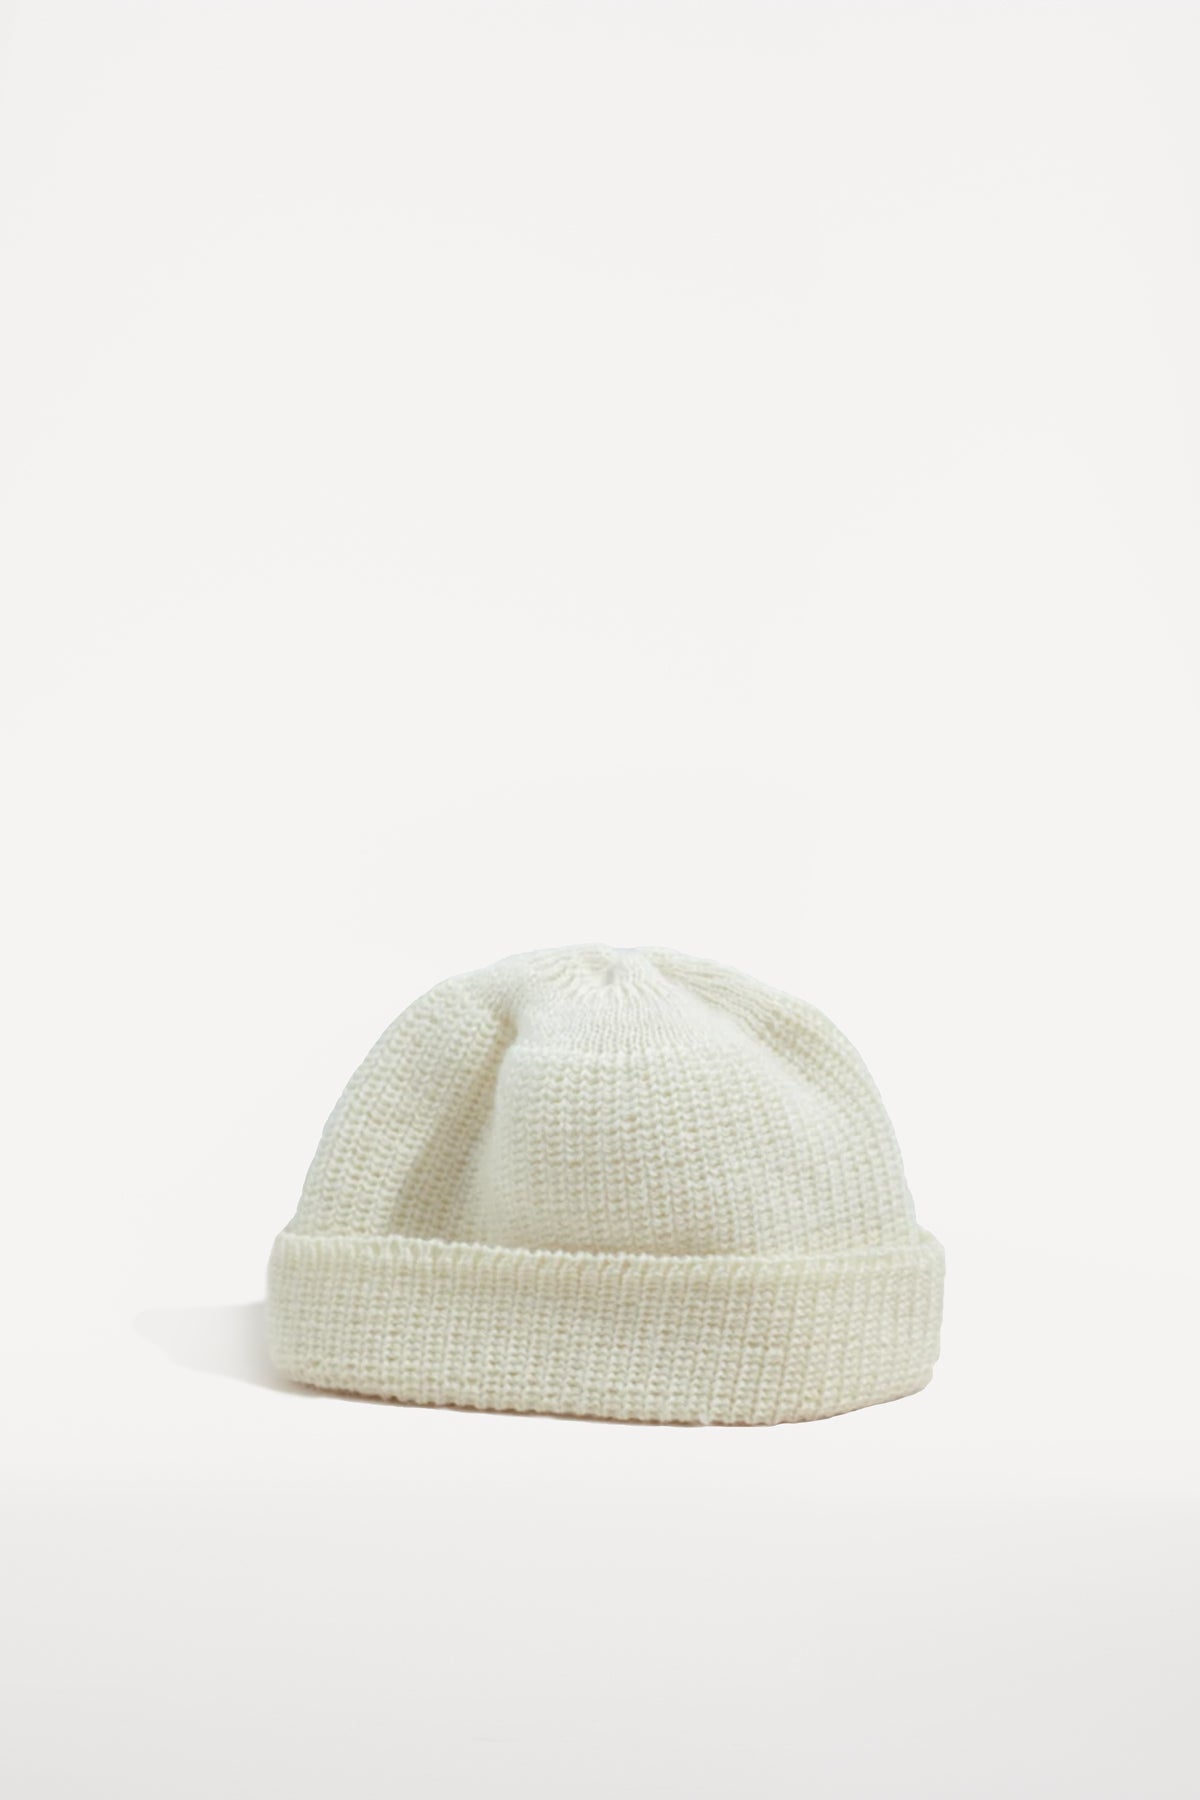 oftt - 00 - knitted rib woolen beanie hat - off-white - pure wool